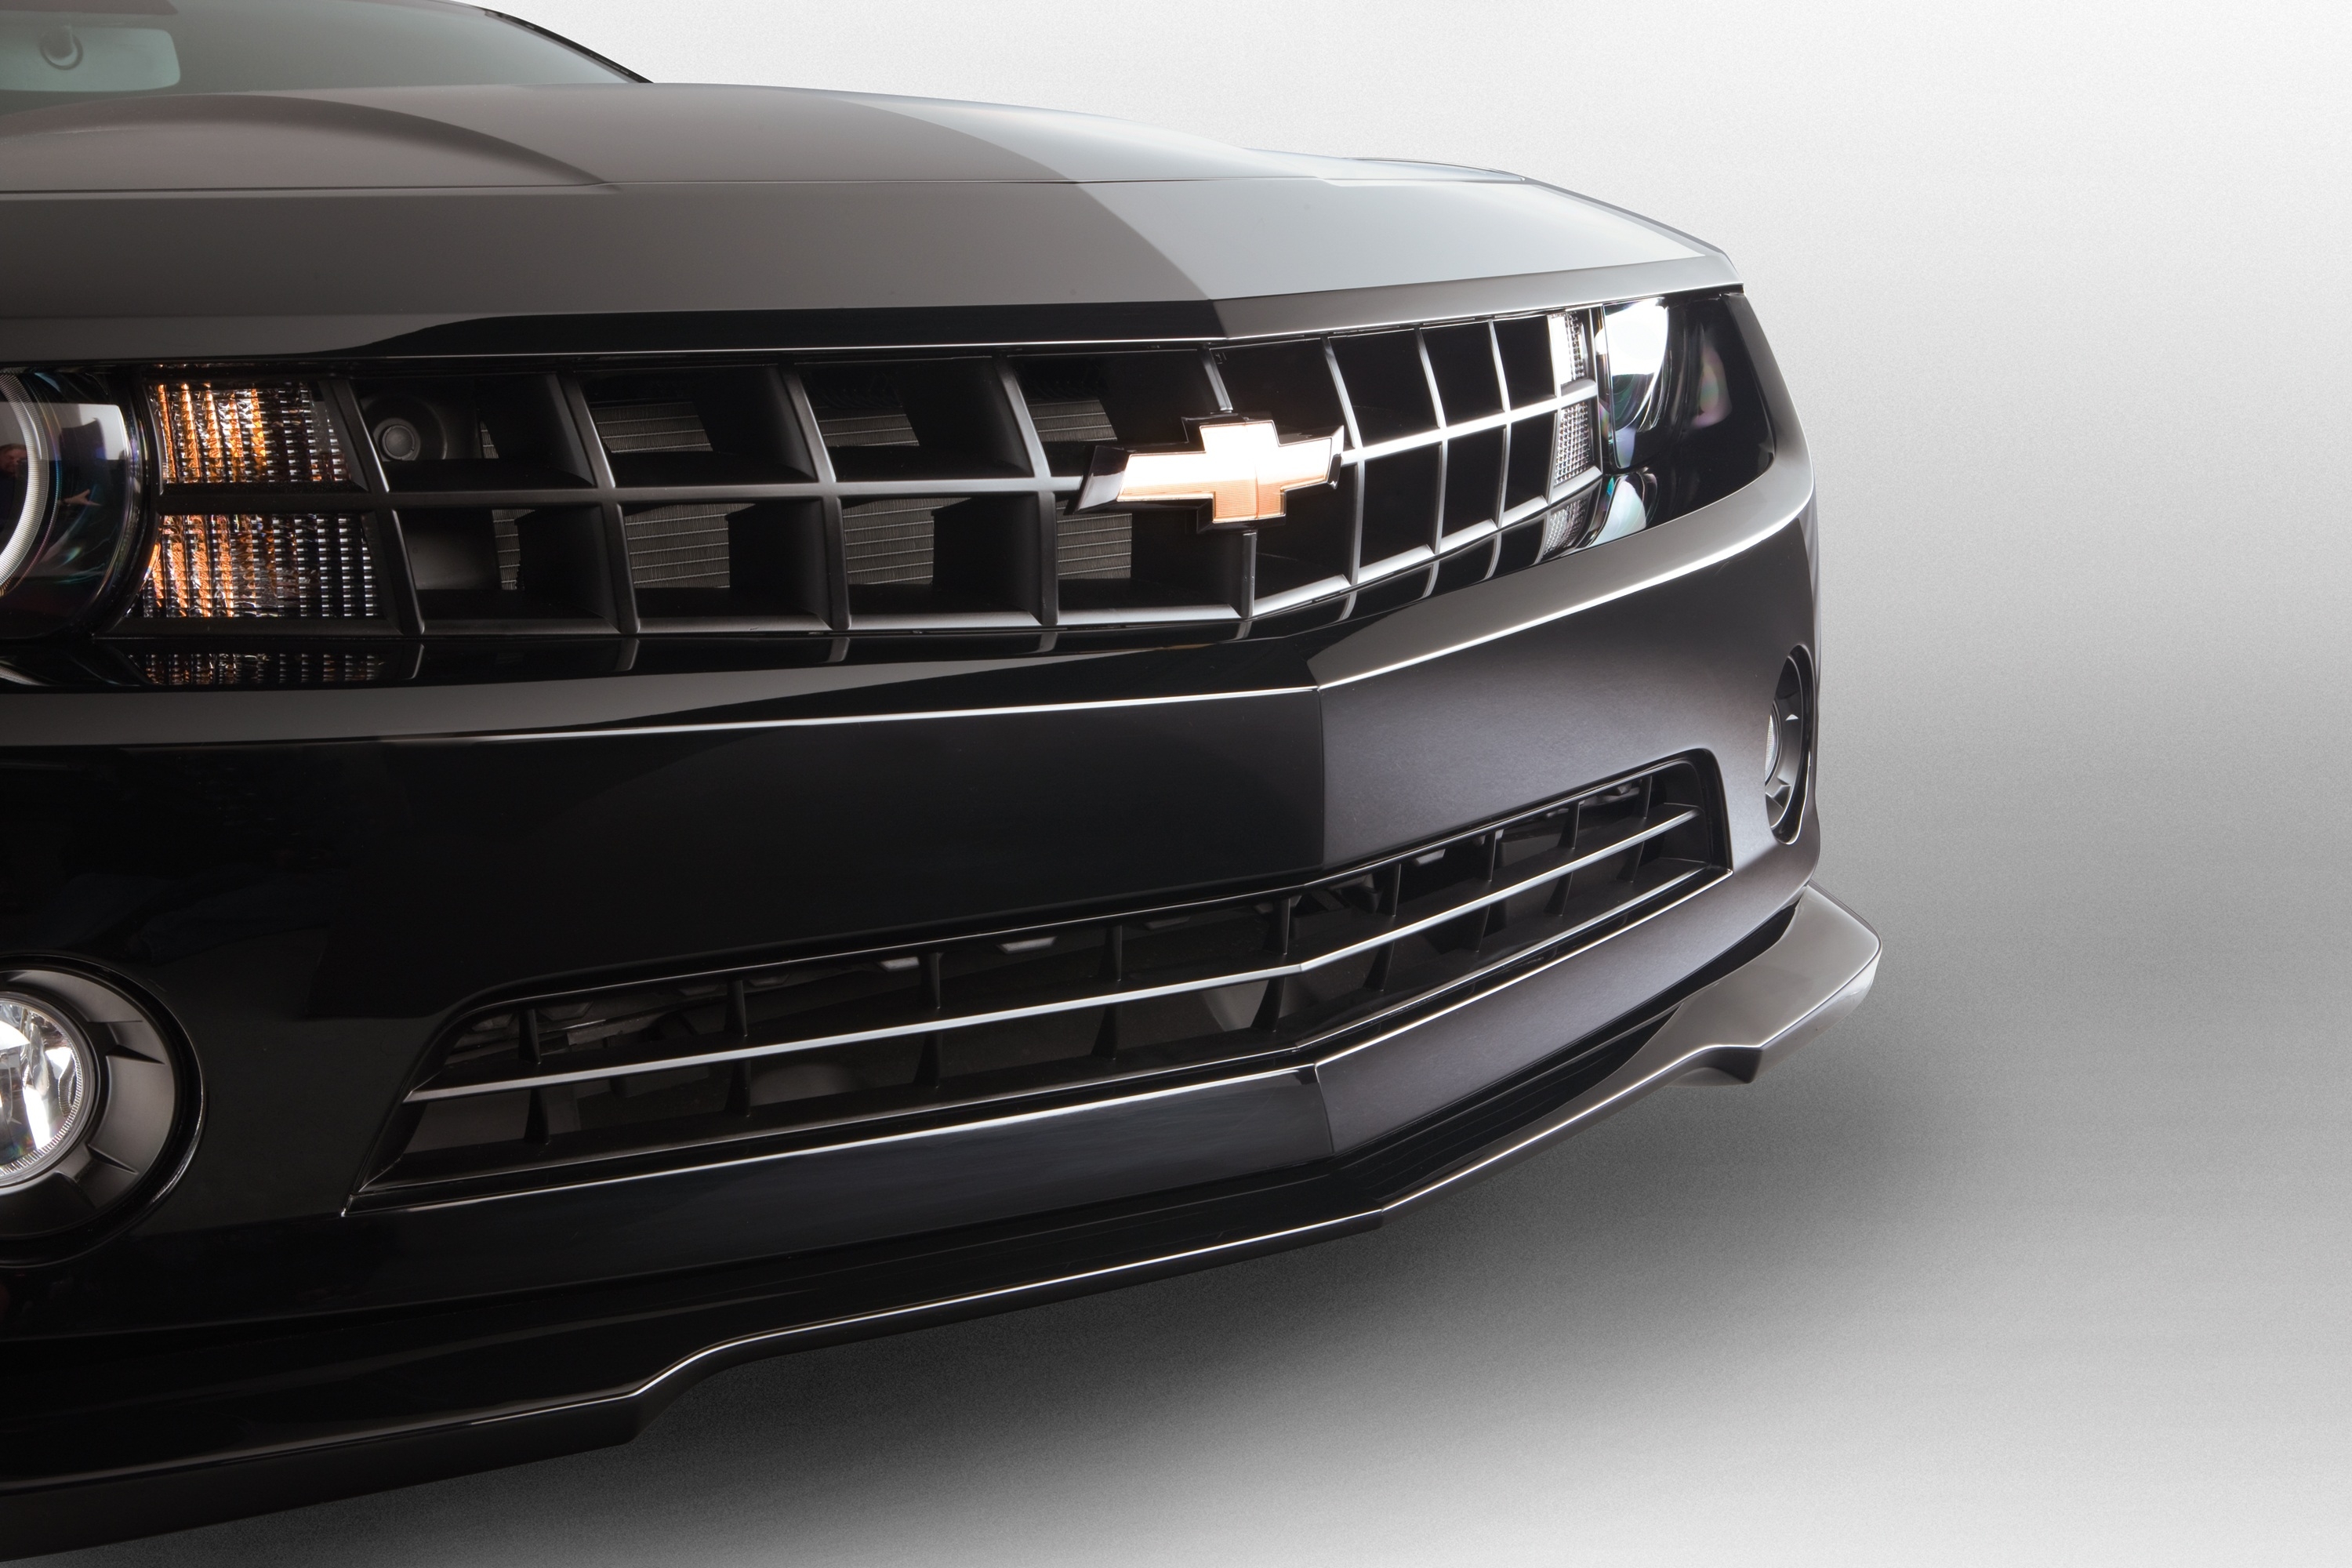 Wallpapers Chevrolet Camaro muscle cars headlights on the desktop